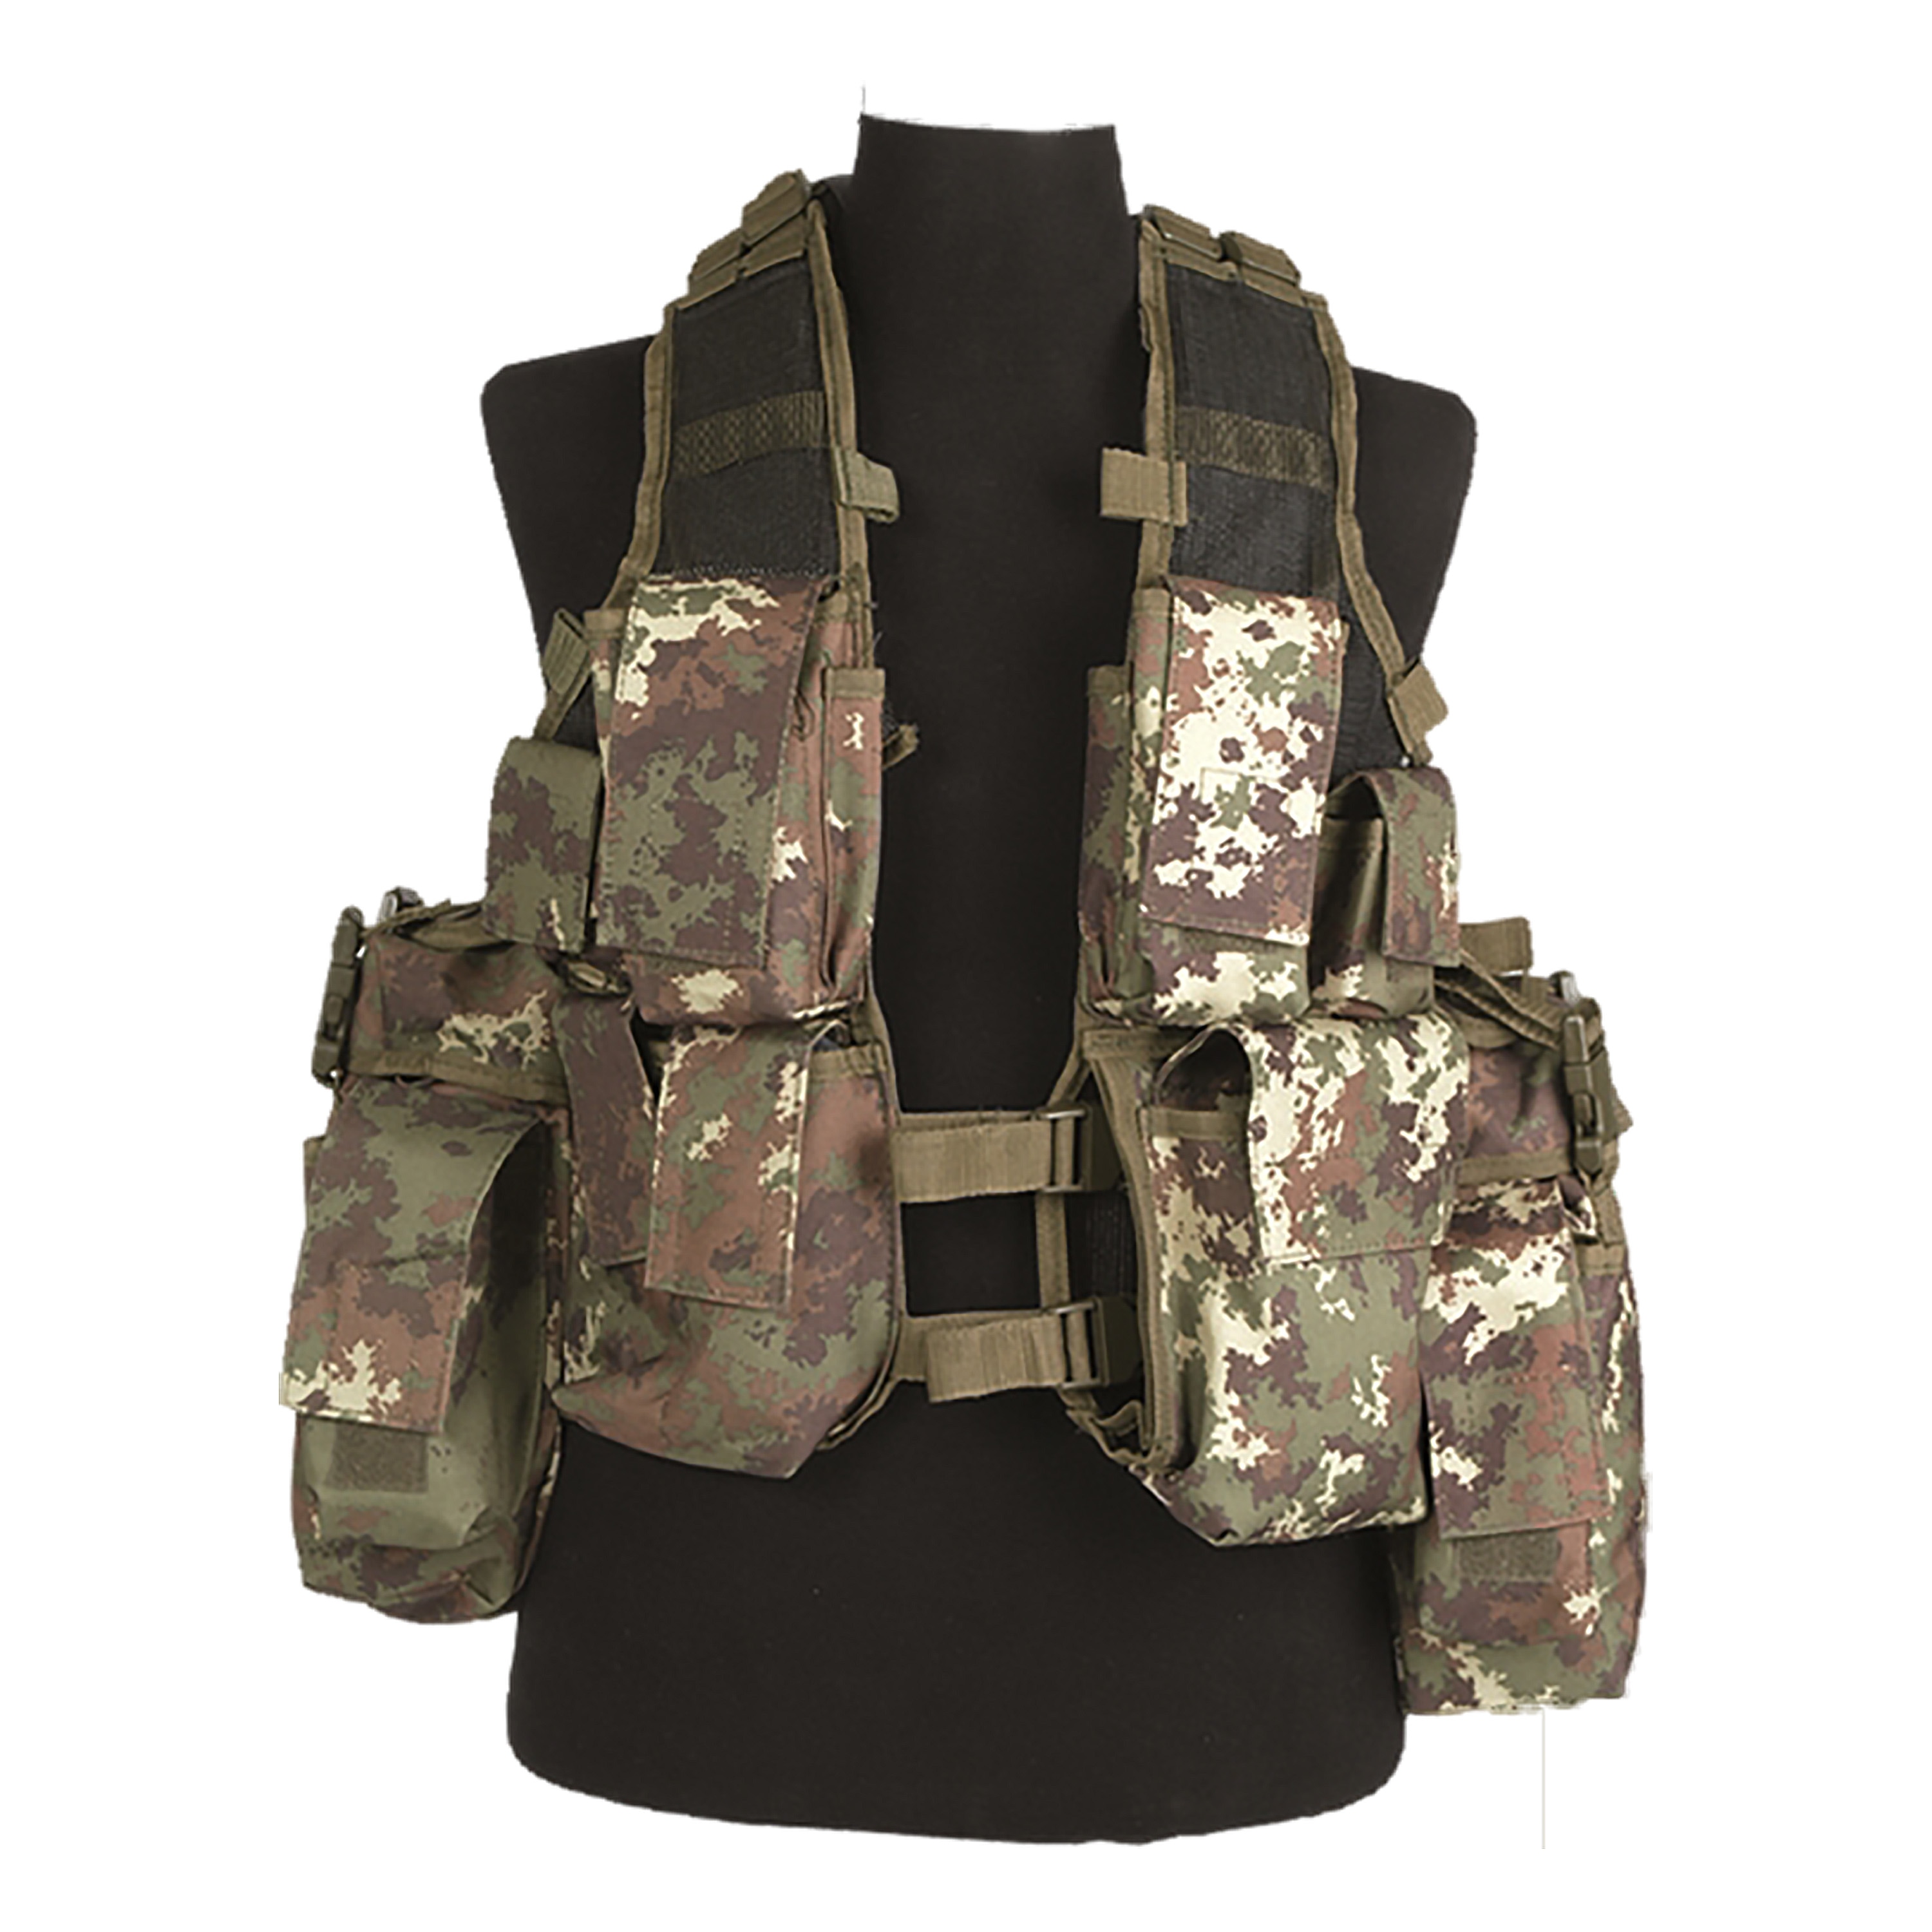 Tactical Assault Vest In Vegetato Woodland Camo 8 Pouches Holster NEW 